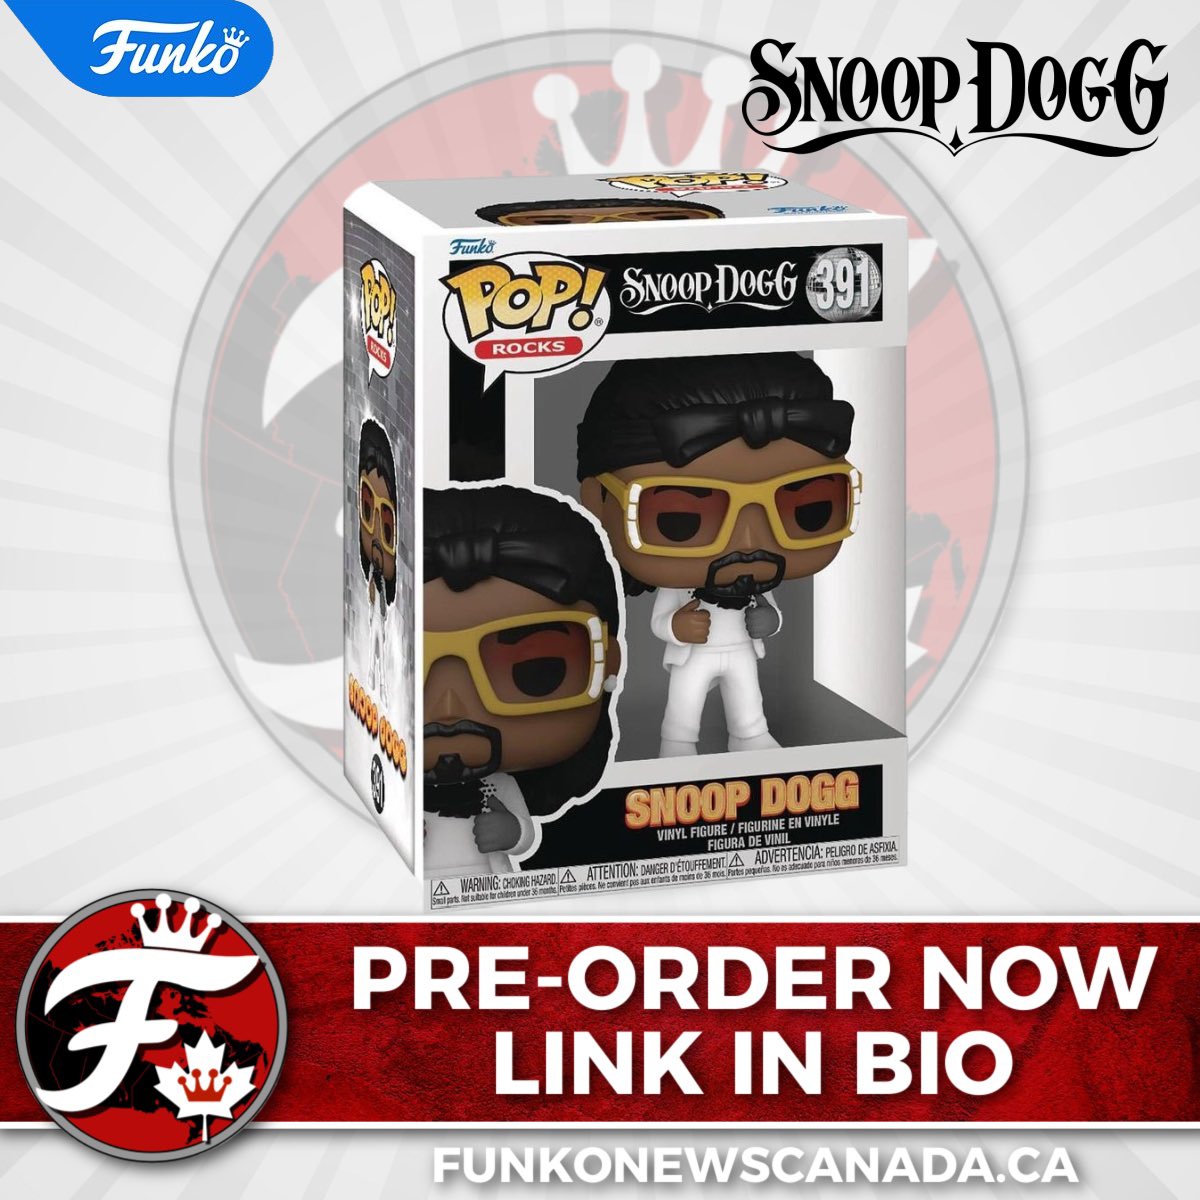 Coming Soon to Your Local Funko Retailer:

Funko Pop! Rocks: Snoop Dogg

Amazon CA:
amzn.to/3UEsYIa

Amazon US:
amzn.to/3y1gaTB

Note: Pictures will update once loaded 
 
#nerdlife #vinylfigures #funkocommunity #funkocollector #toycommunity #collectibles #geeklife